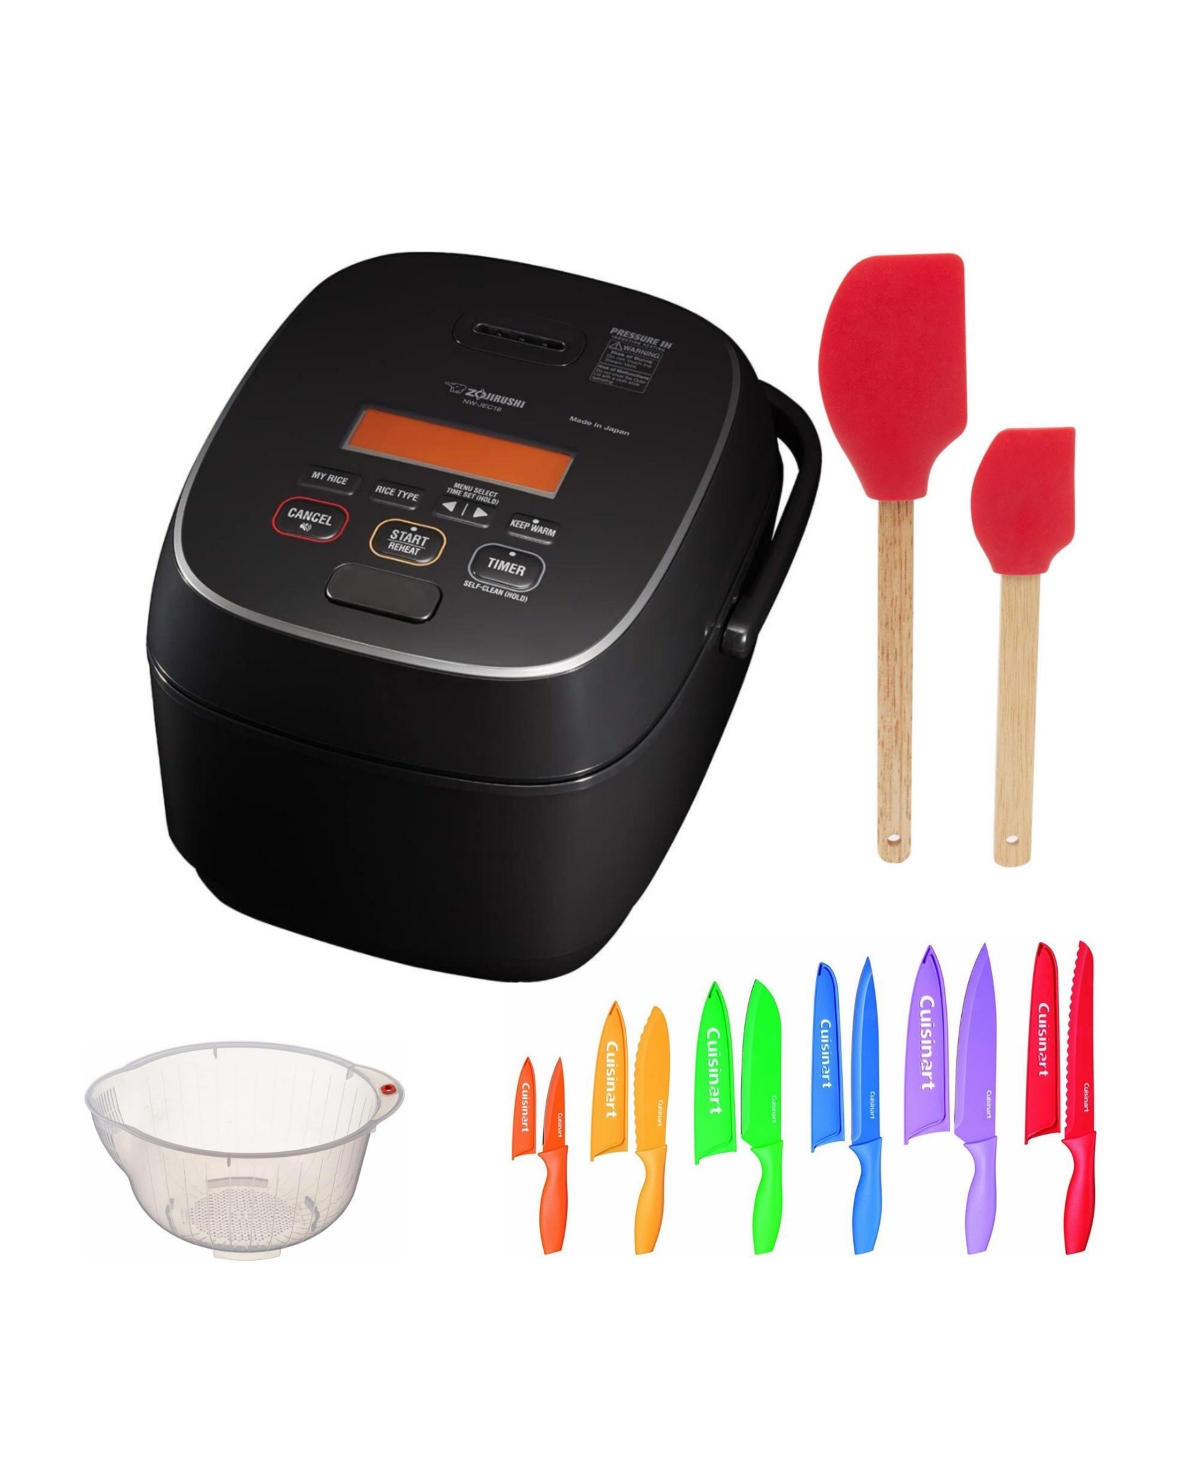 Nw-Jec18Ba Pressure Induction Heating Rice Cooker With Accessory - Black